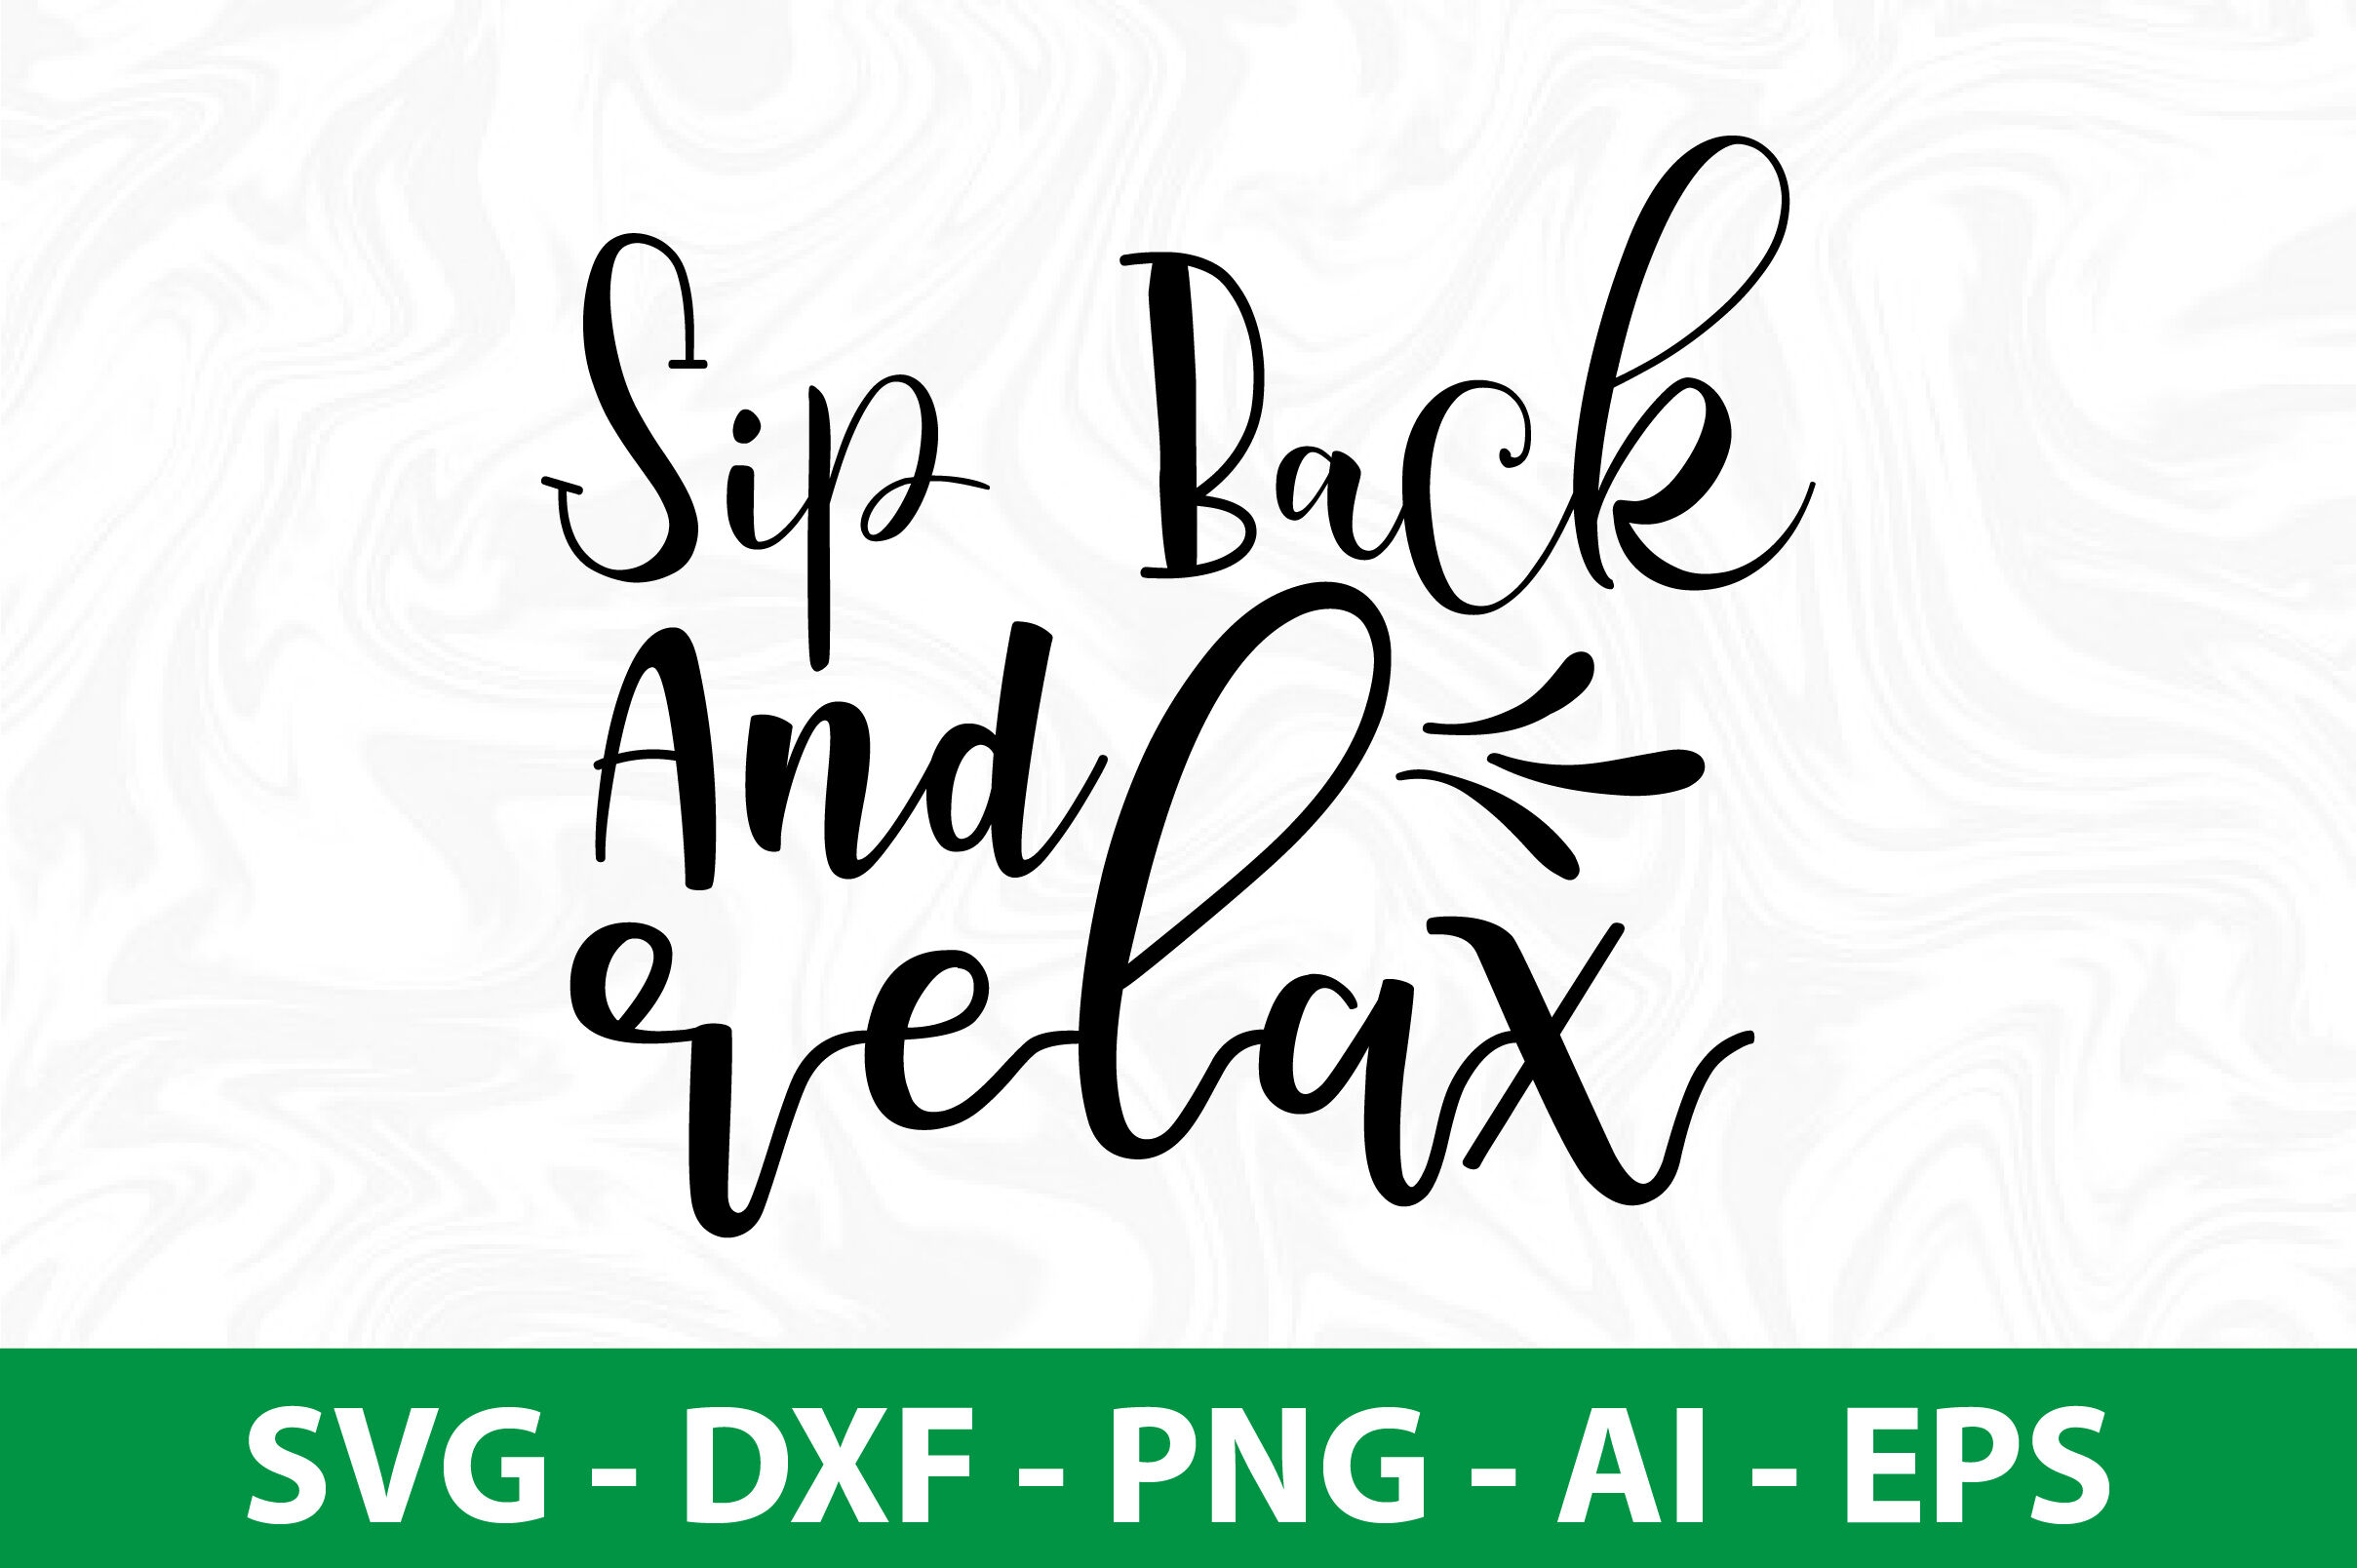 sip-back-and-relax-svg-by-orpitabd-thehungryjpeg